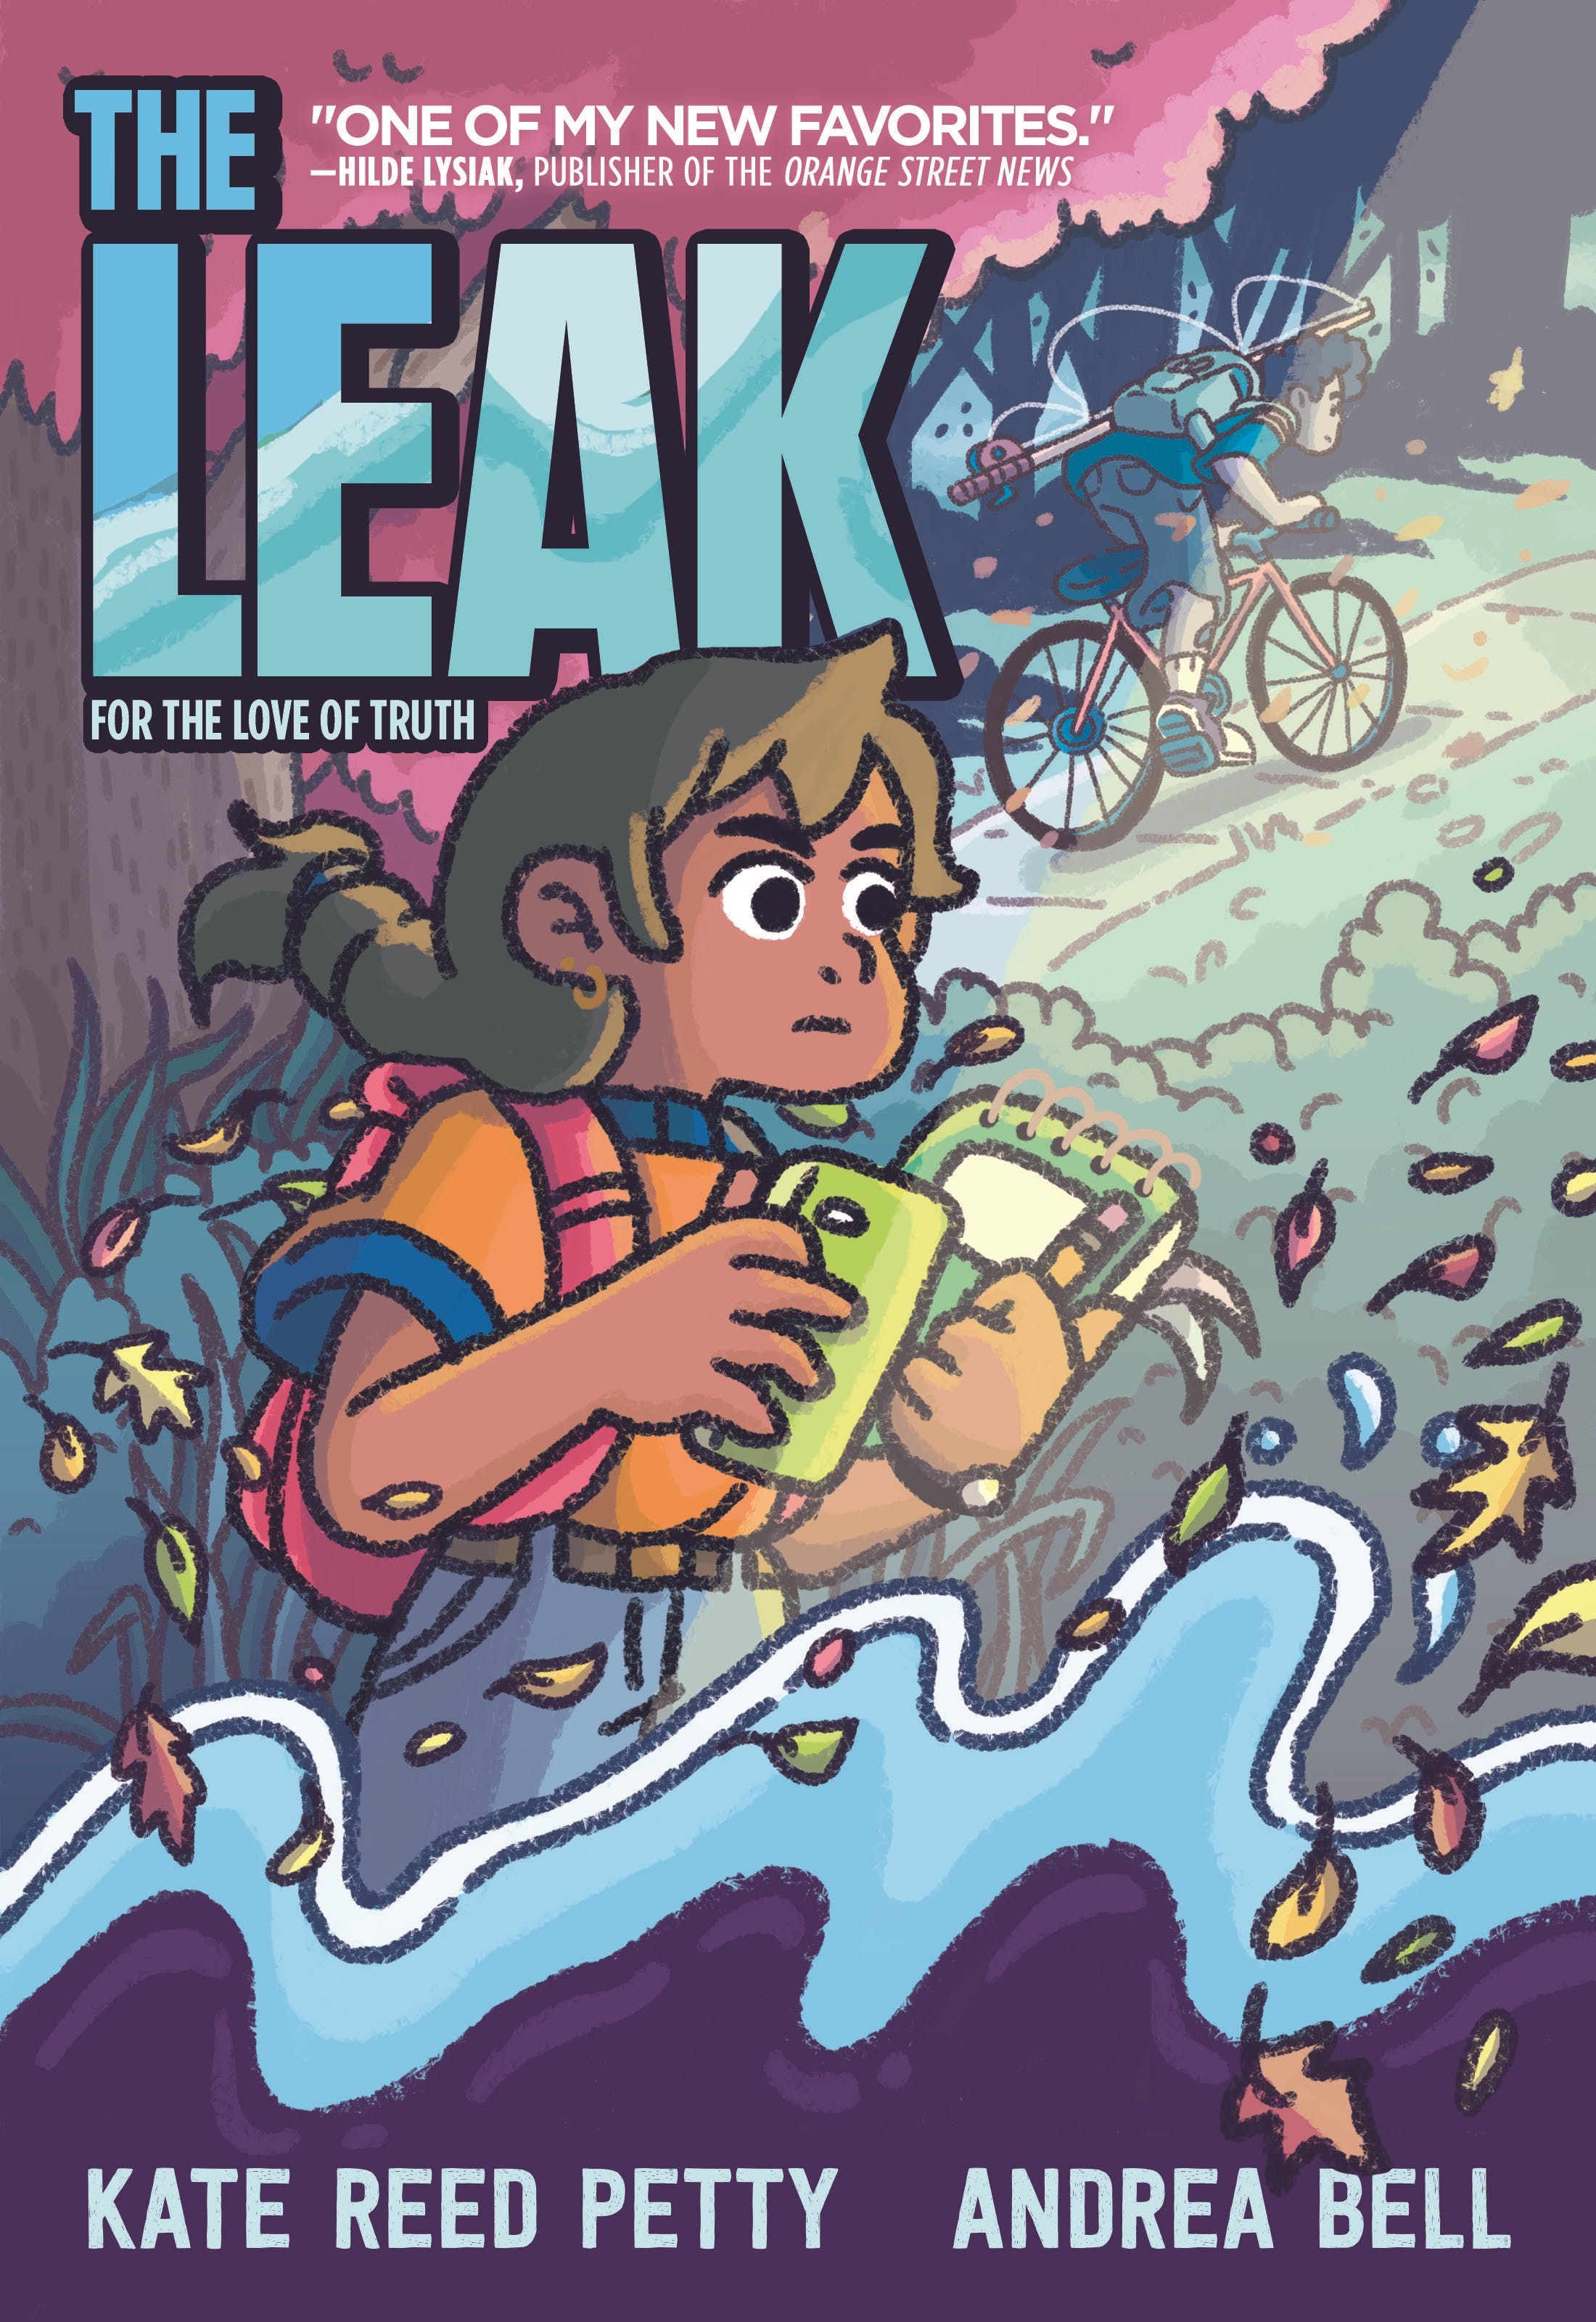 Cover of "The Leak" by Kate Reed Petty. Shows the main character, Ruth, holding a smartphone, pad of paper, and pencil as a boy rides a bike in the background. There are falling leaves throughout and dark water at the bottom.